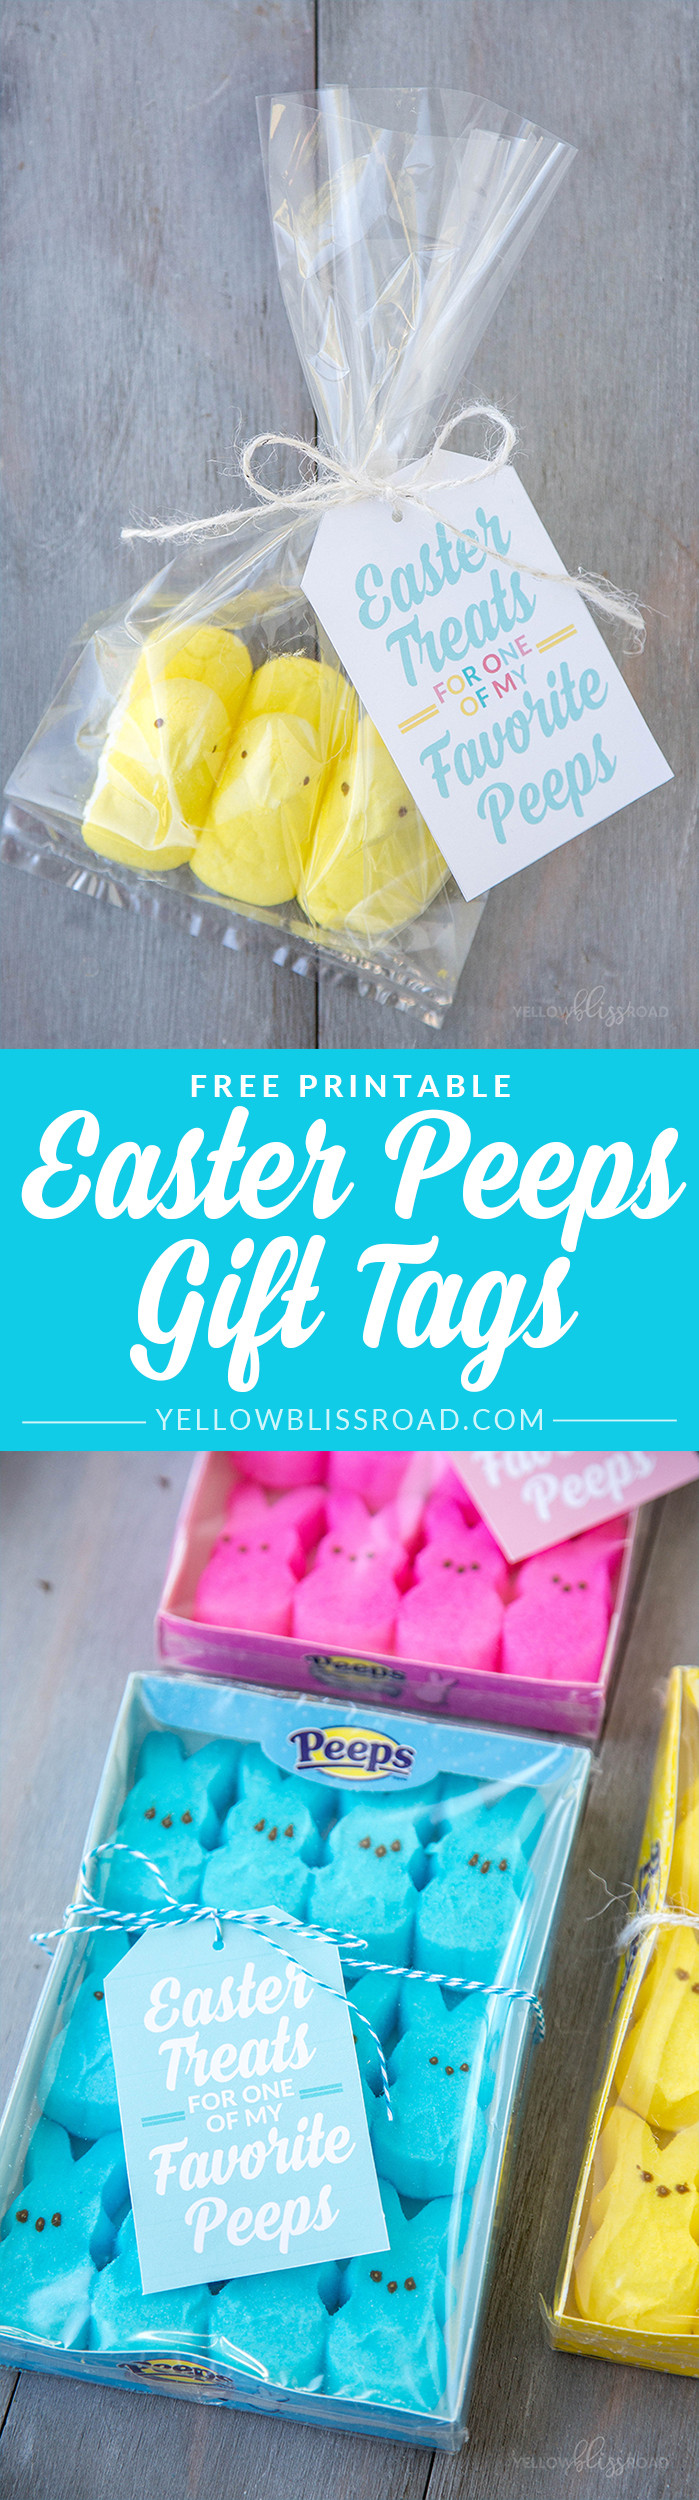 Easter Gifts For Friends
 Peeps Easter Gift Idea with Free Printables